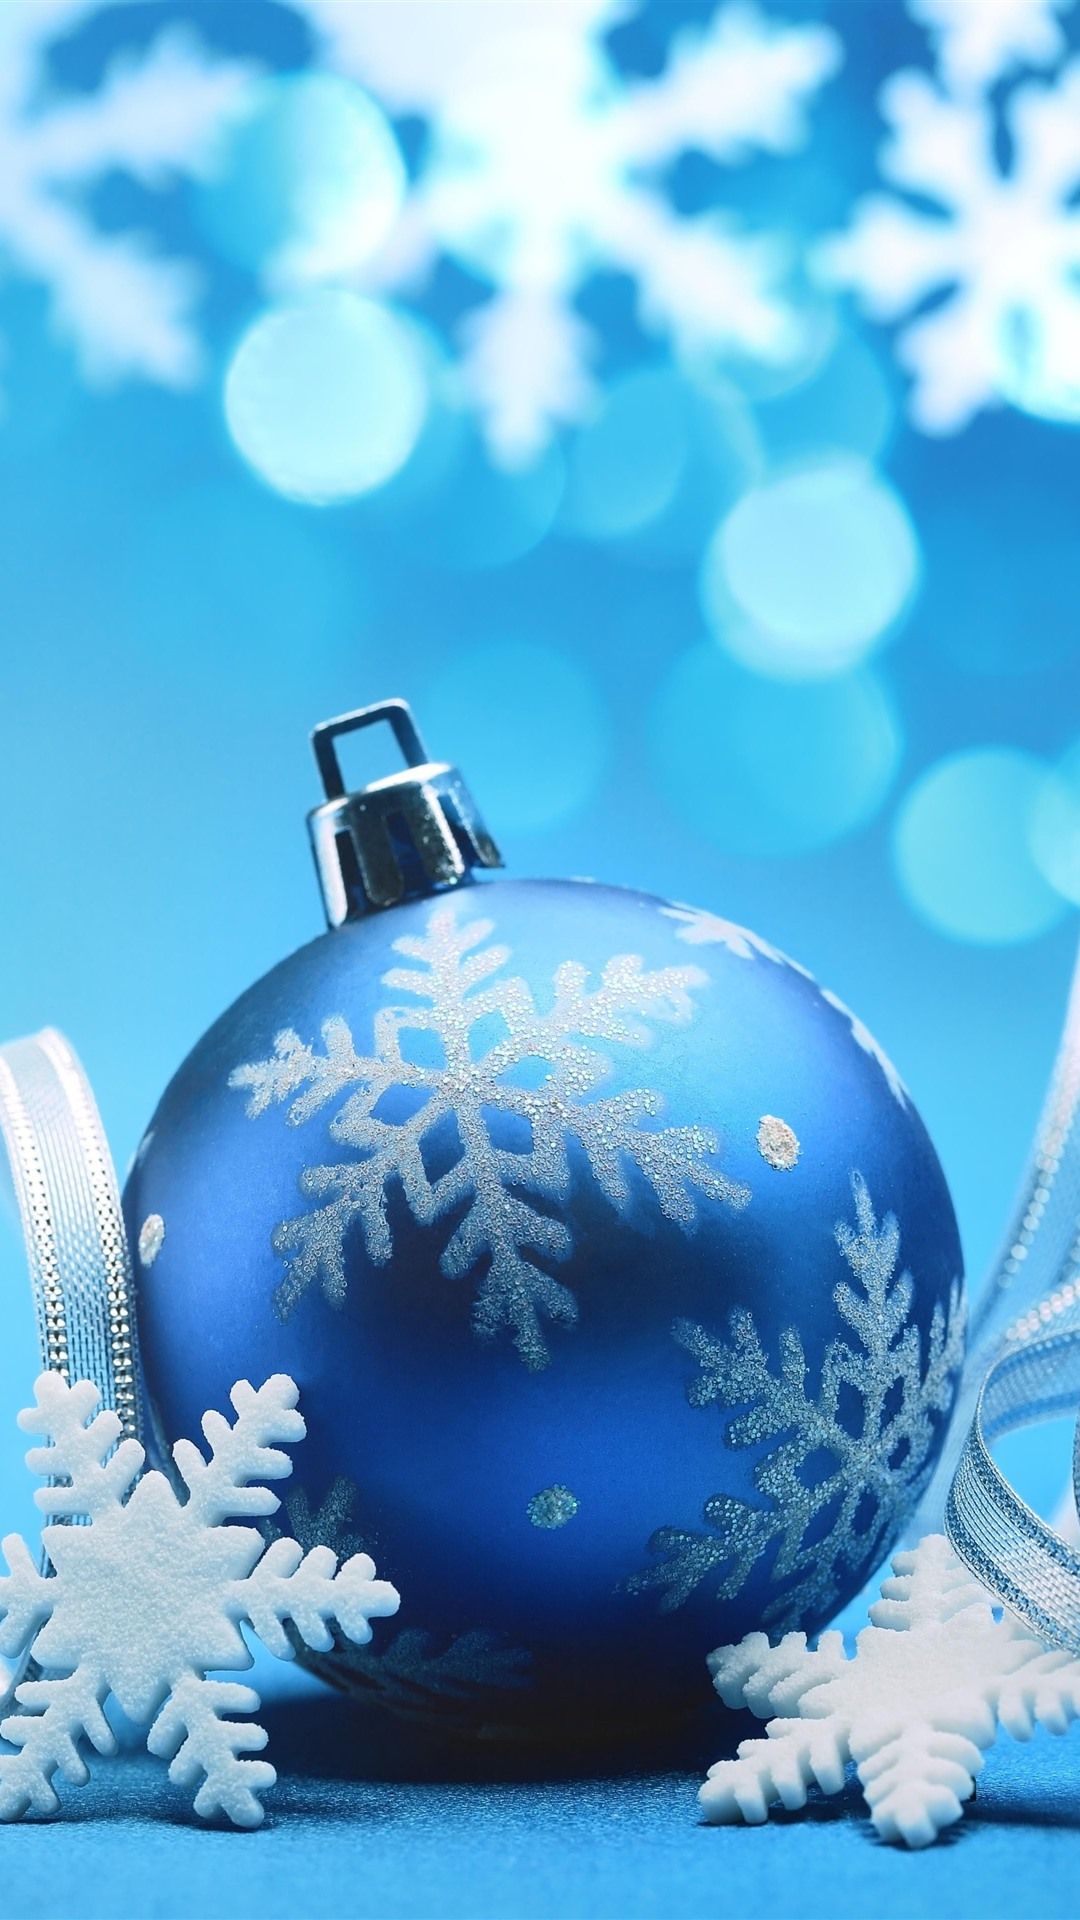 Blue Christmas Ball, Ribbons, Snowflakes, Blue Background 1242x2688 IPhone 11 Pro XS Max Wallpaper, Background, Picture, Image